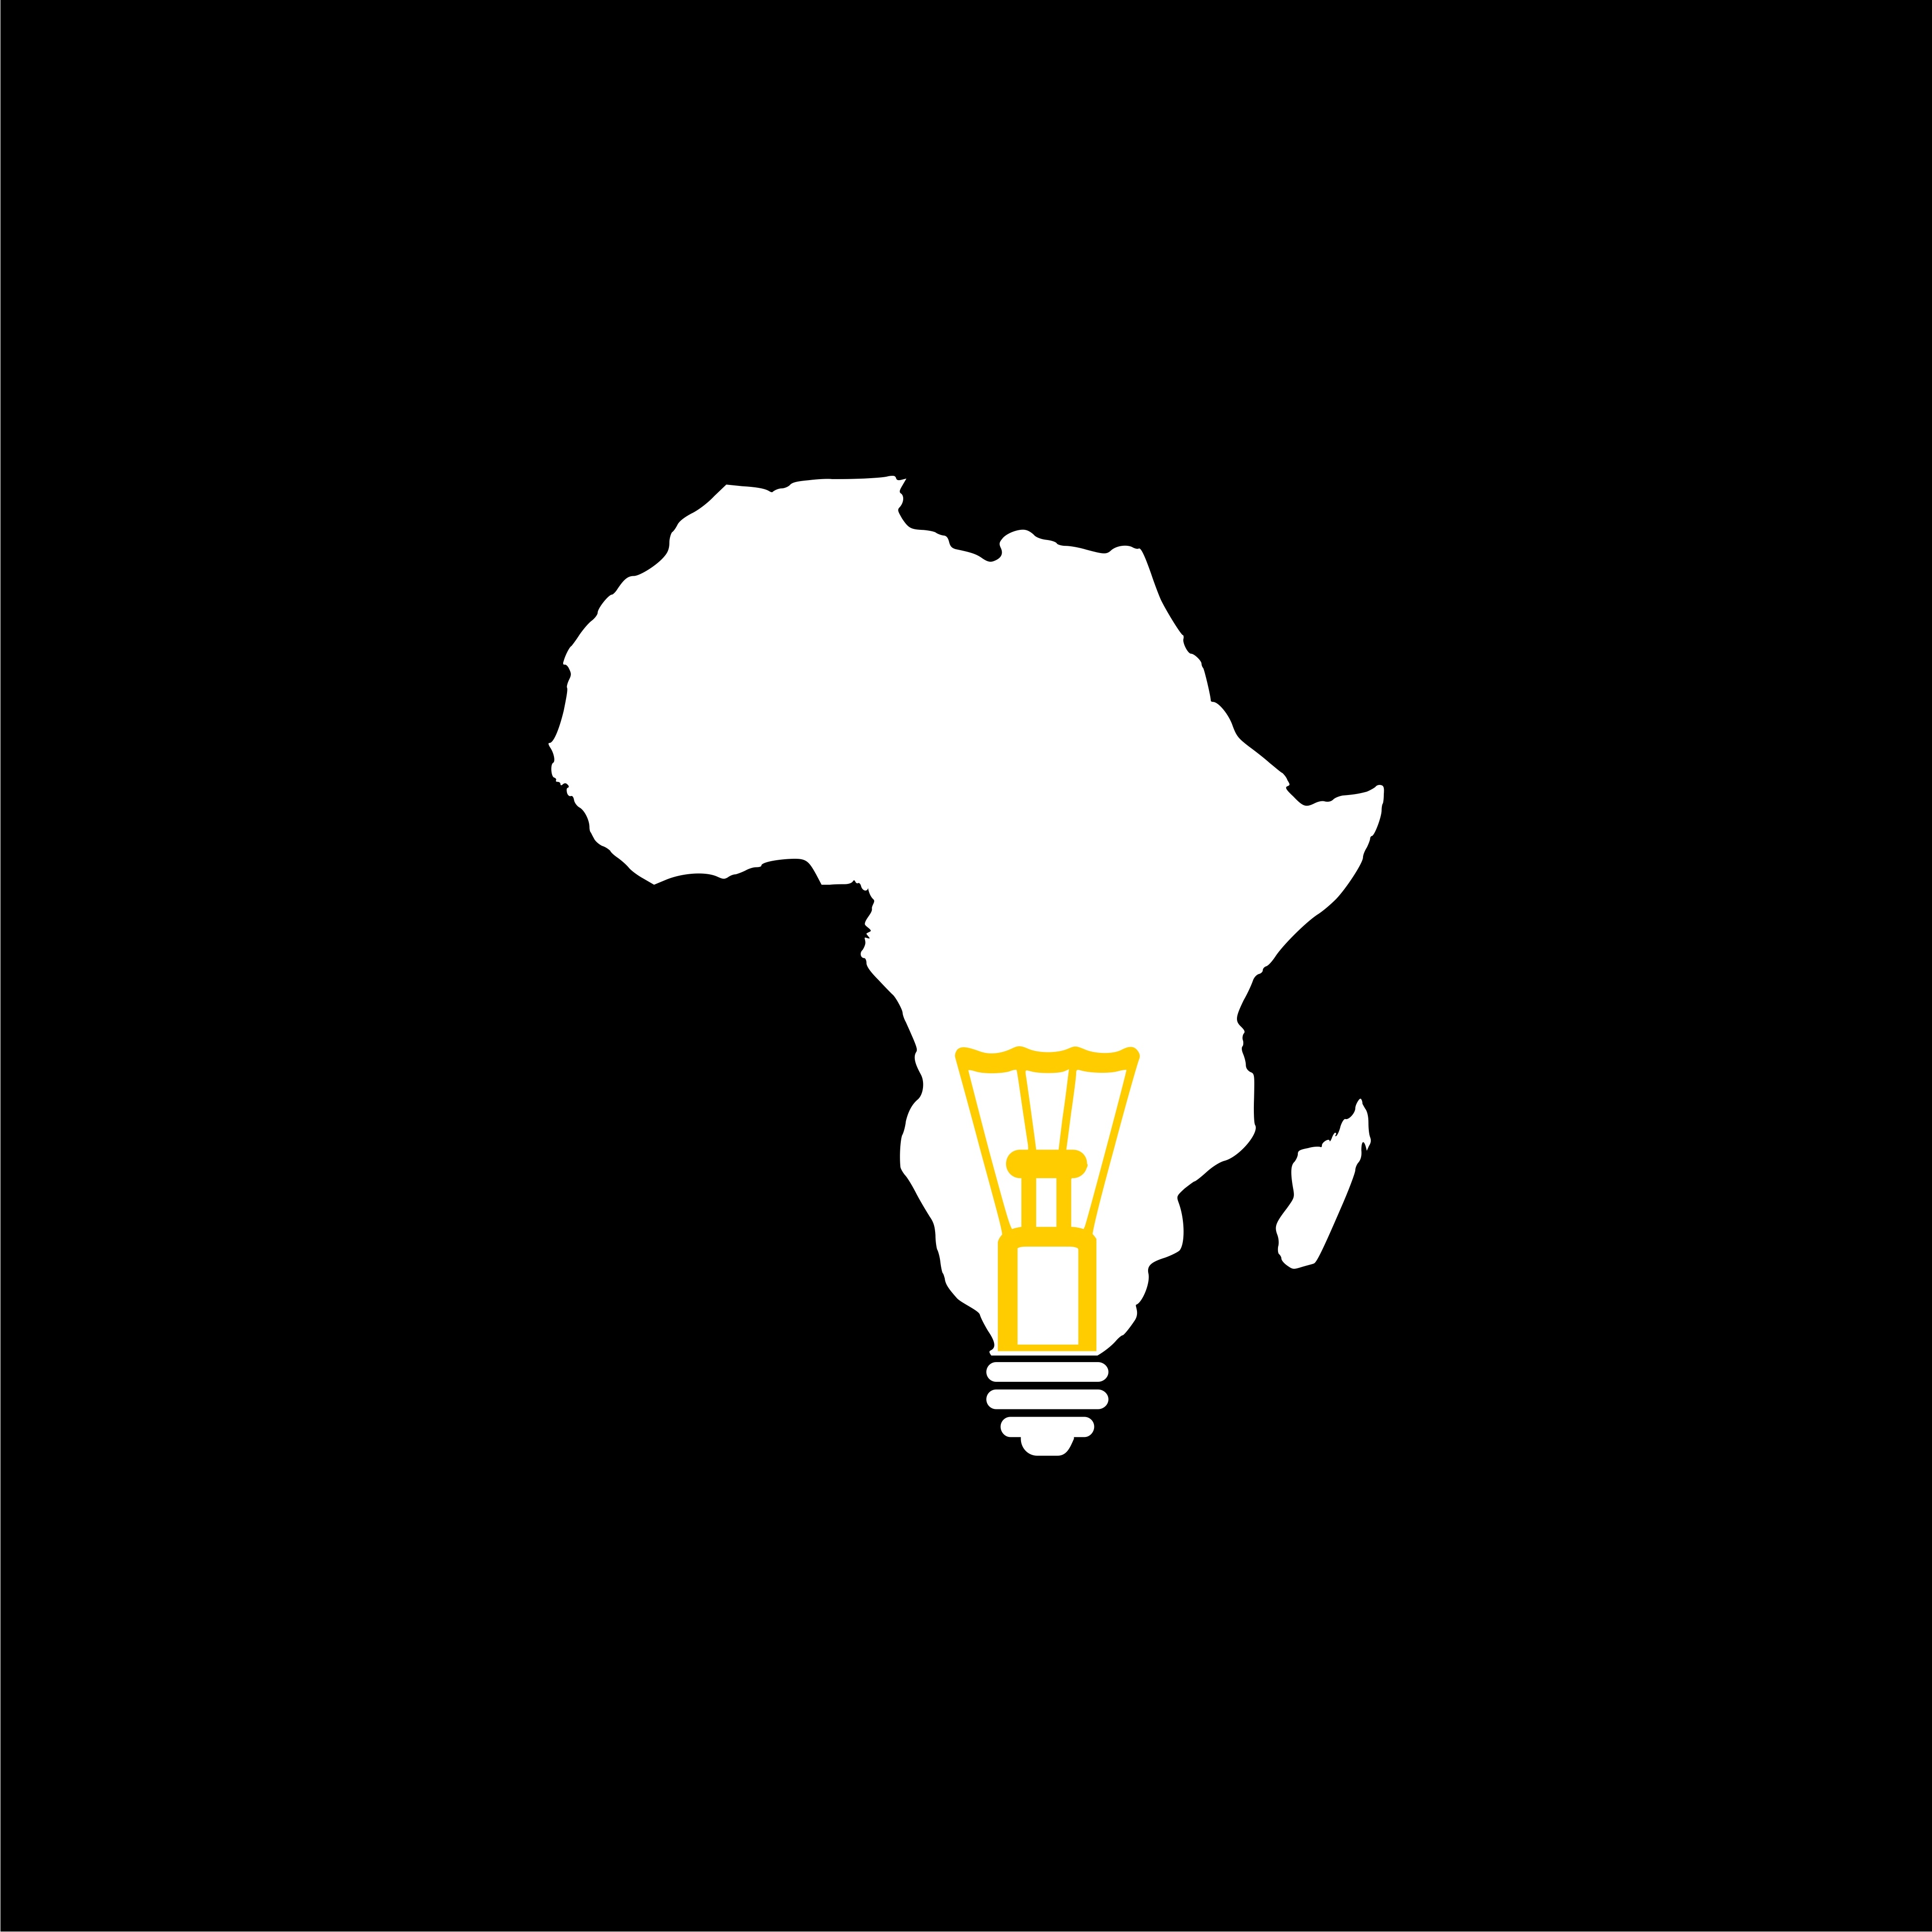 Energize Africa - a mission that musn't be failed.